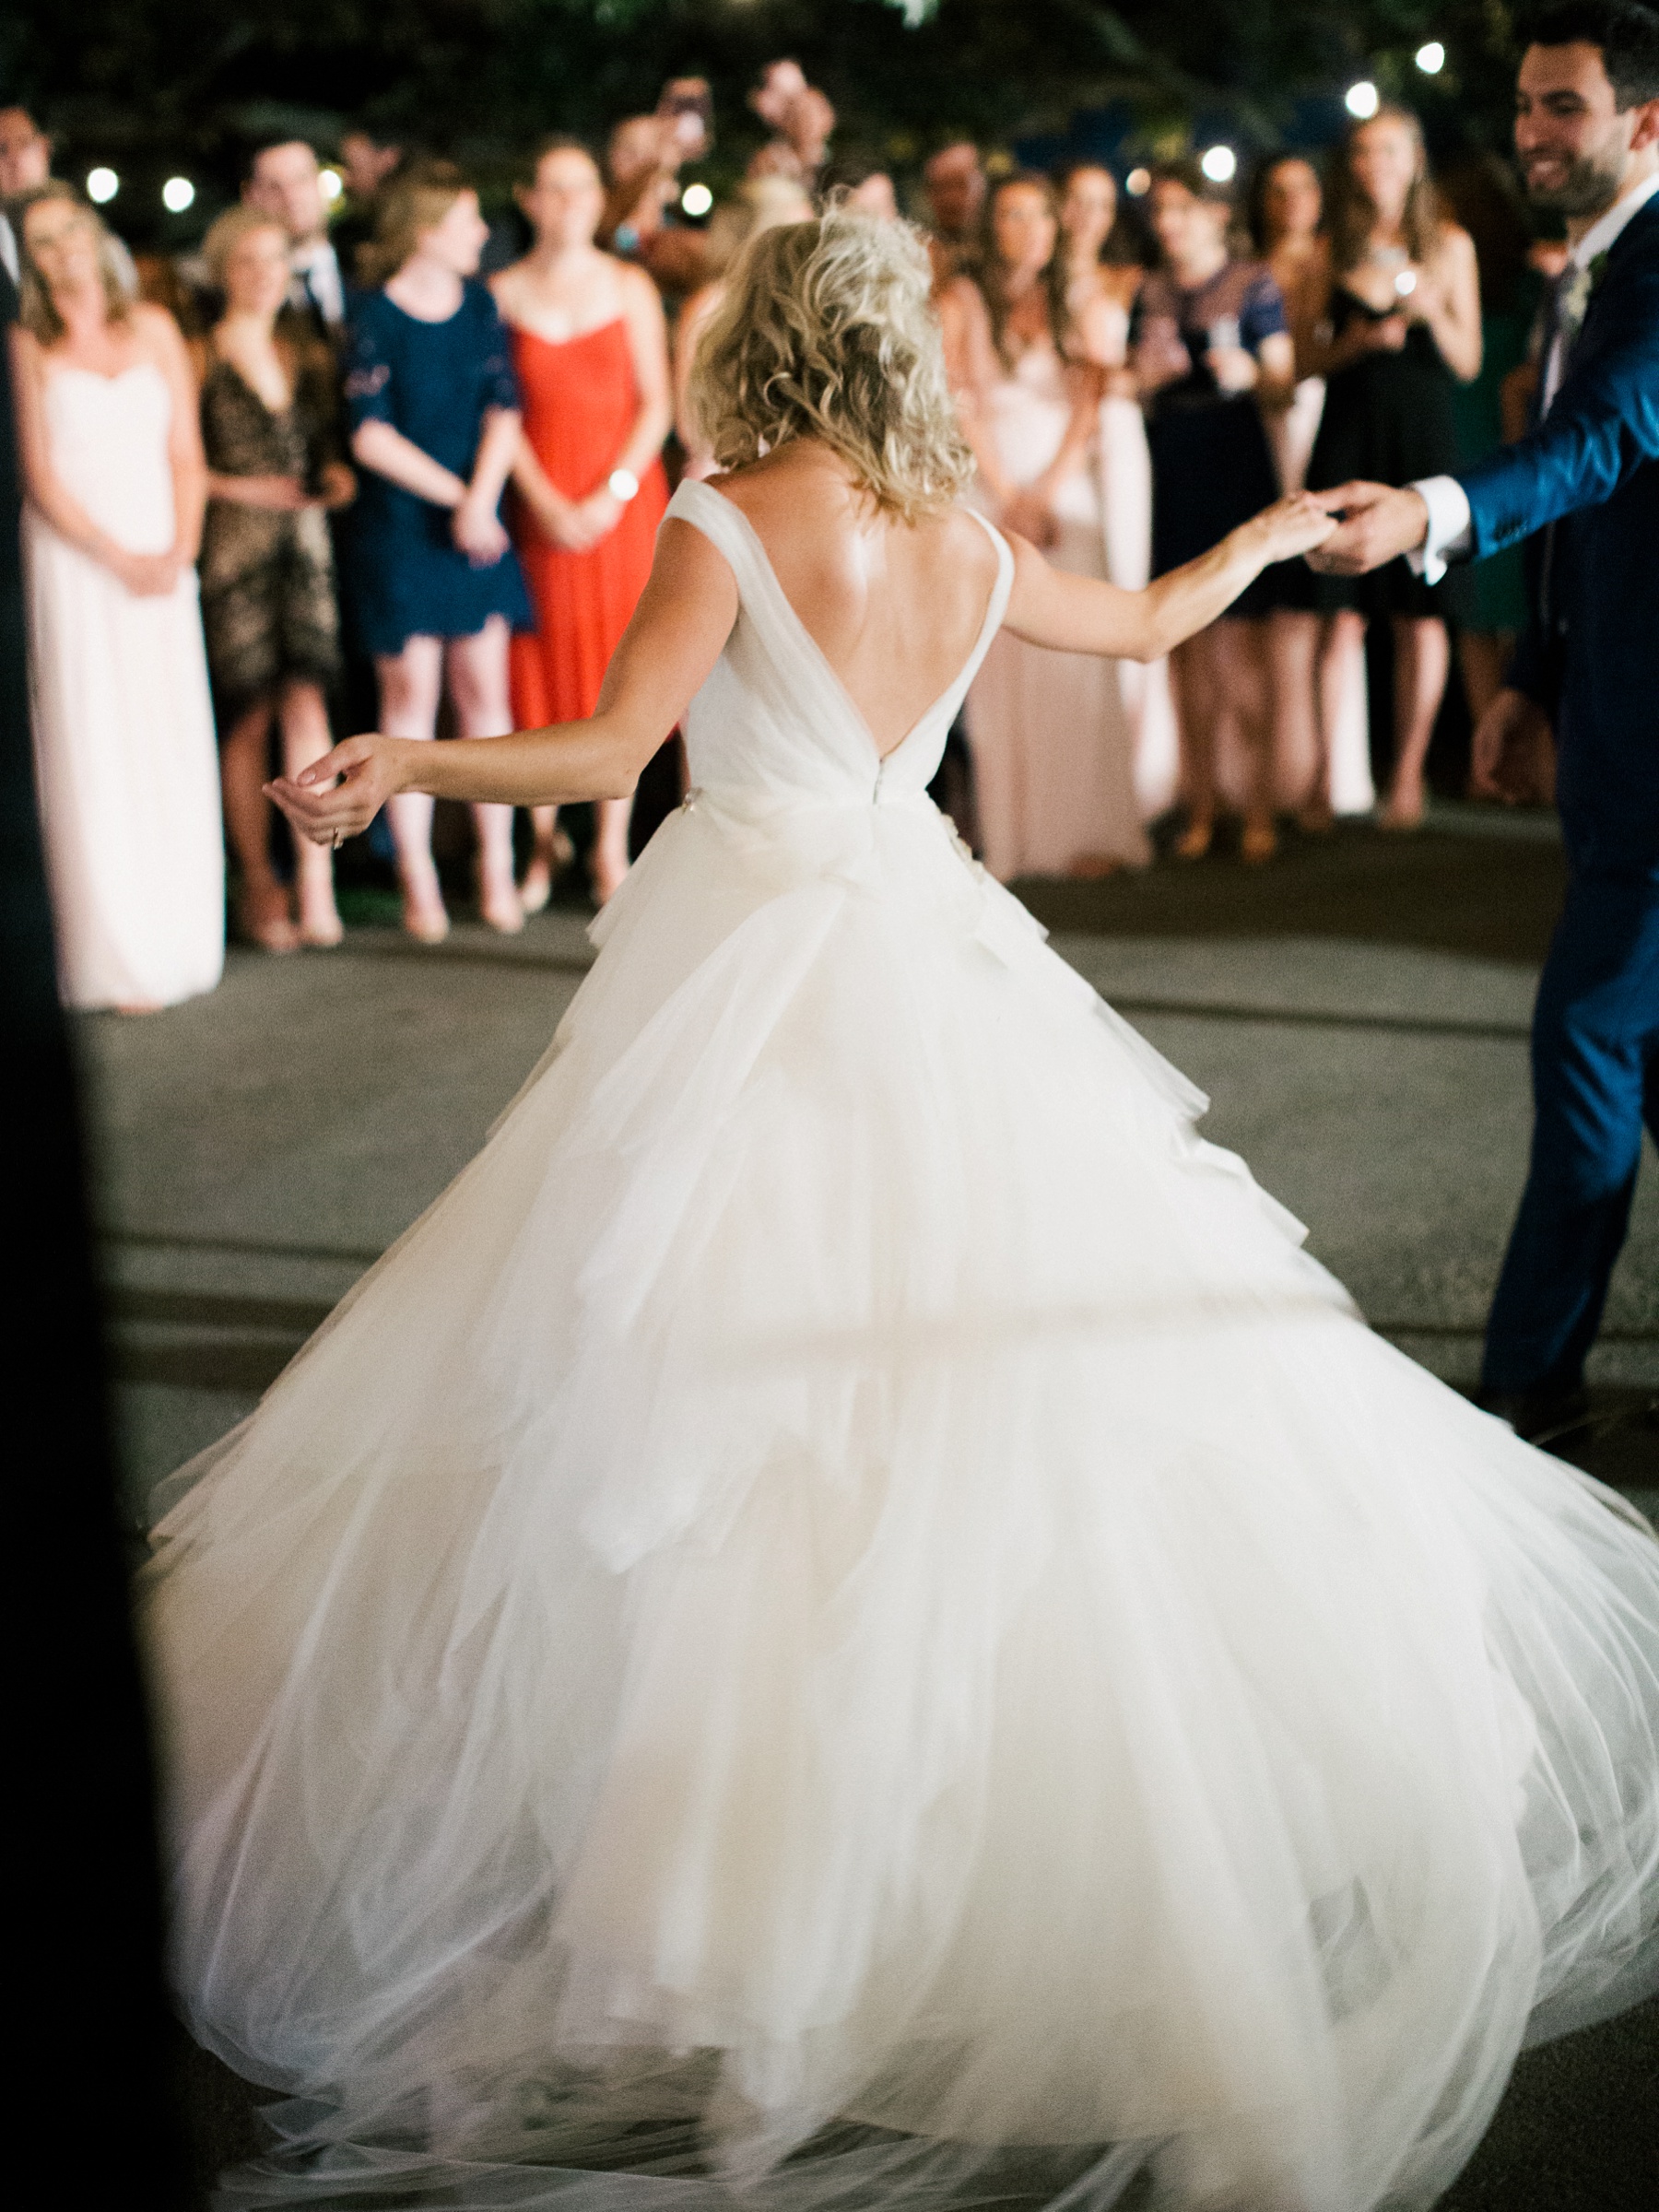 CMT Music City Jessica Mack and Andreas Plackis Wedding_1525.jpg